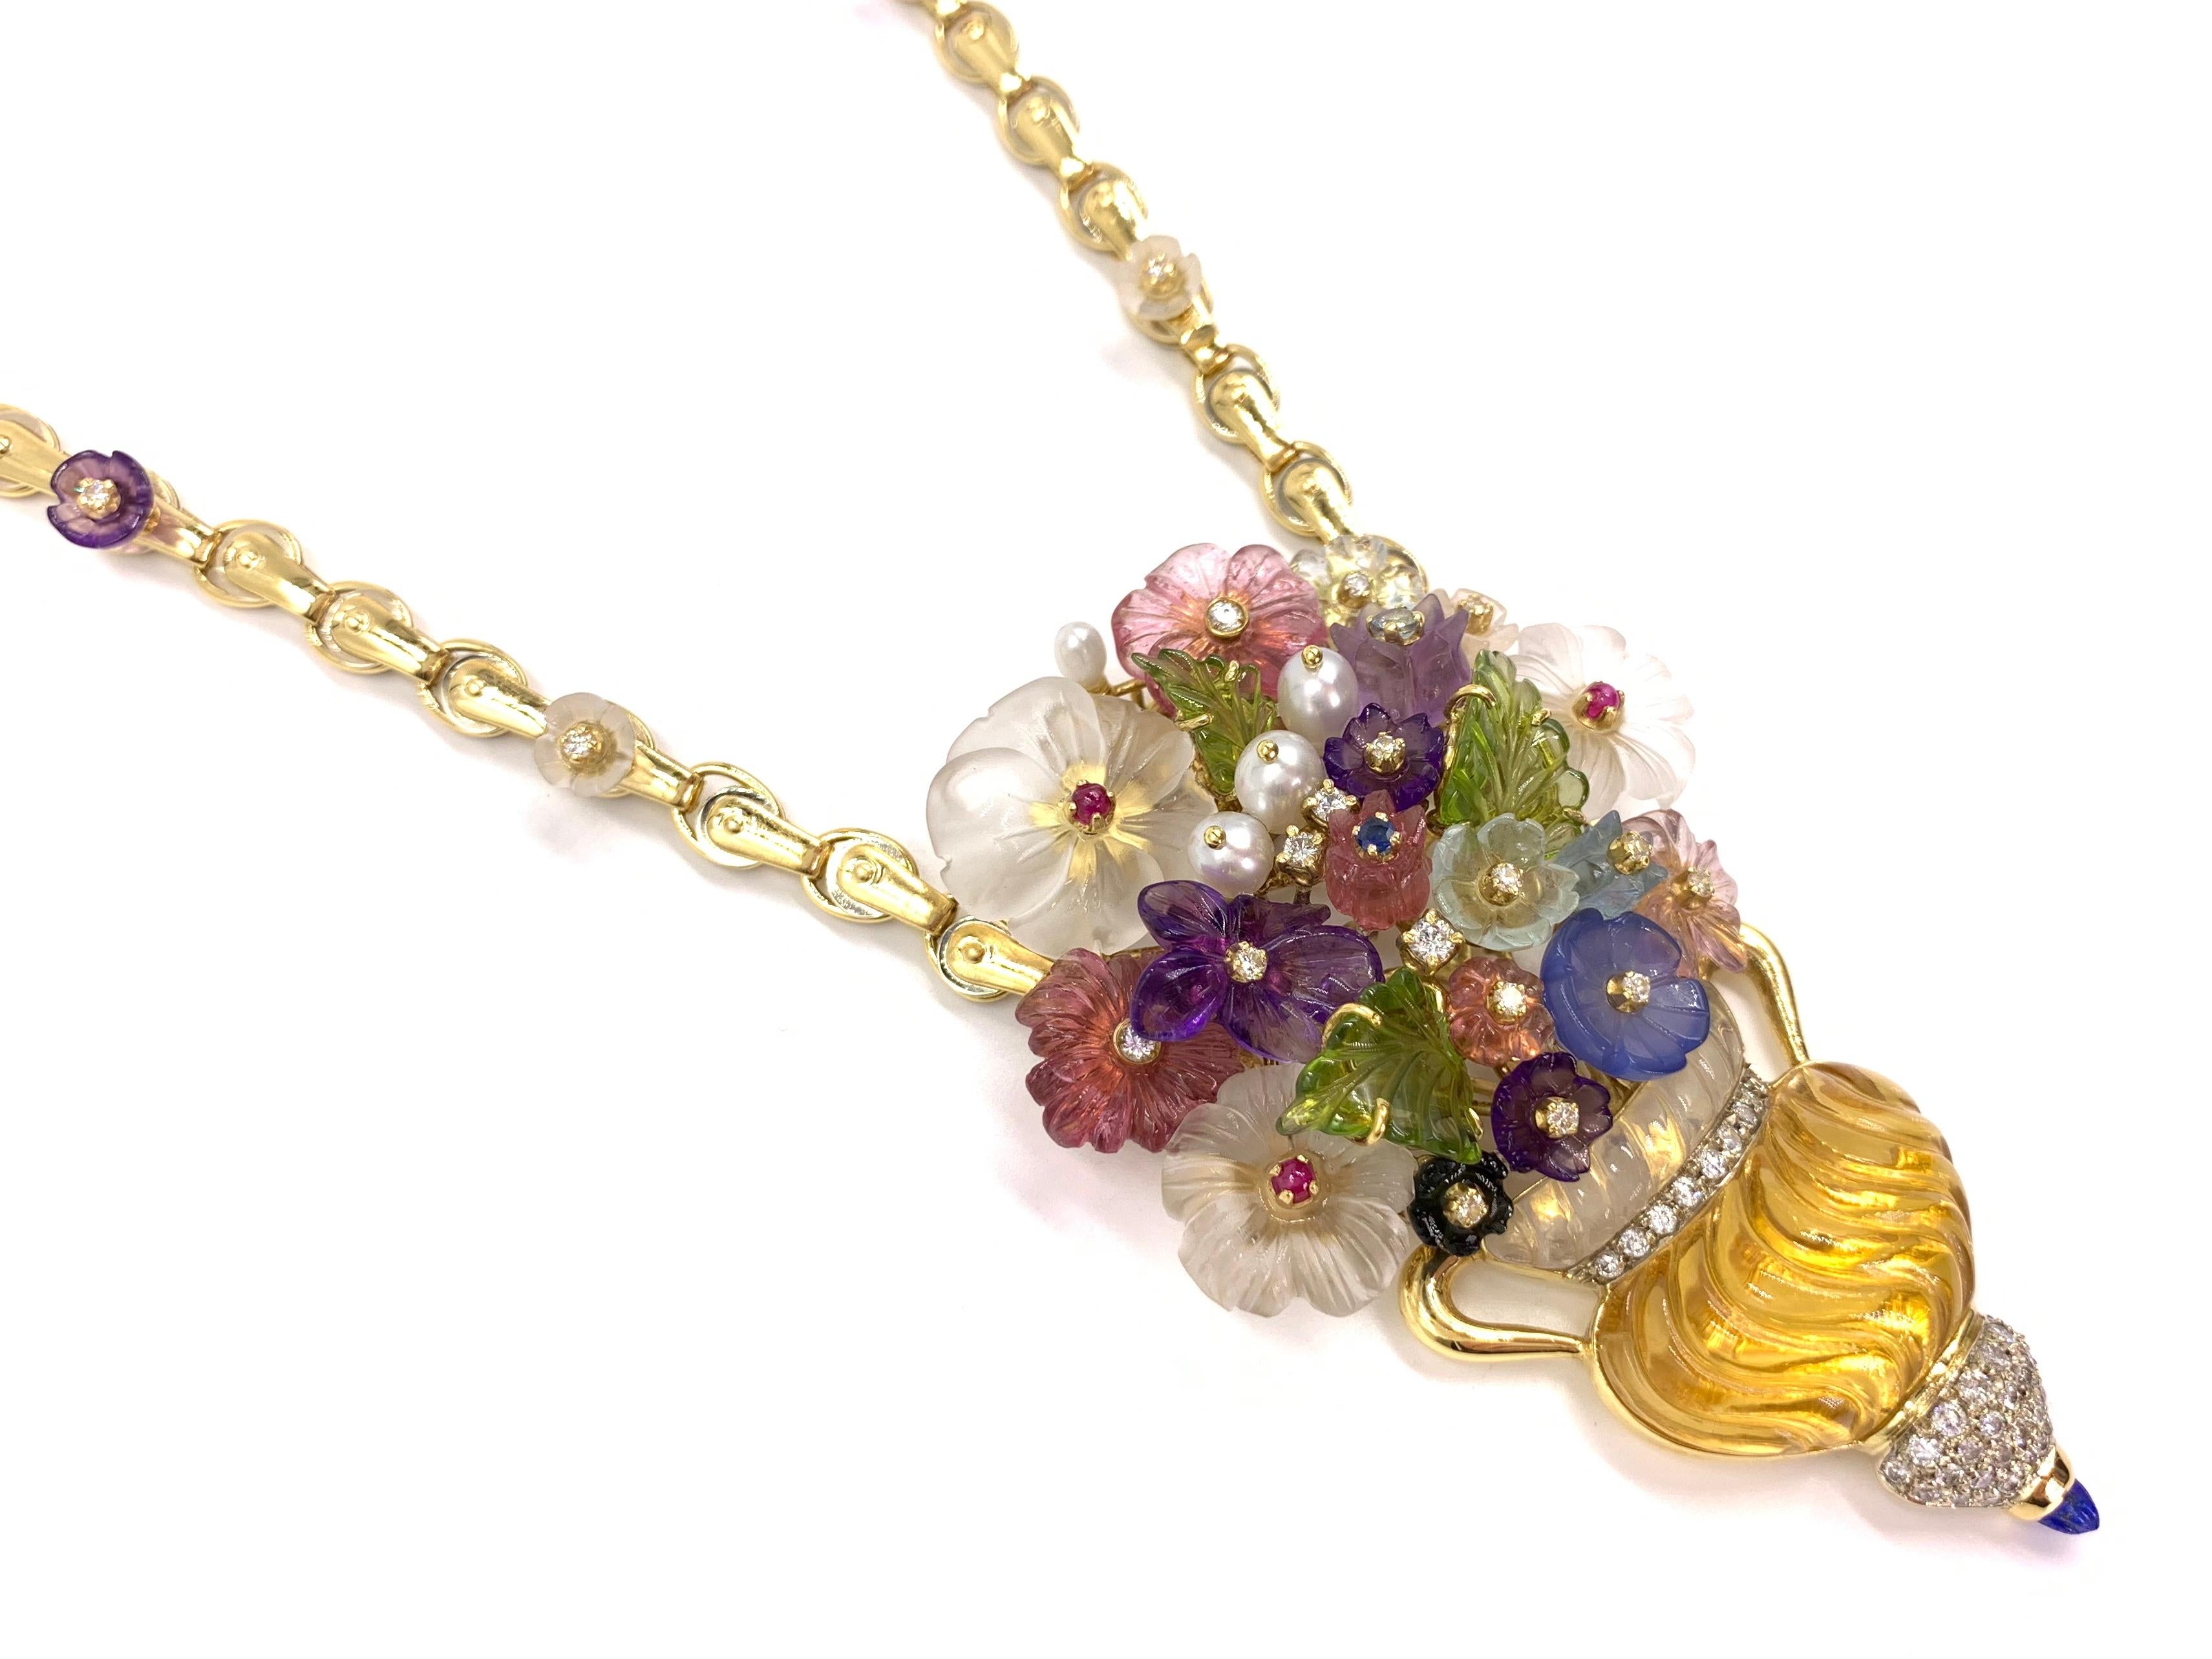 Circa 1980 from the exclusive and unique Italian jewelry designer Santagostino, known for their artistic jewelry which can hold up to twenty different types of faceted and carved gemstones. This fascinating hand made pendant floral motif necklace is